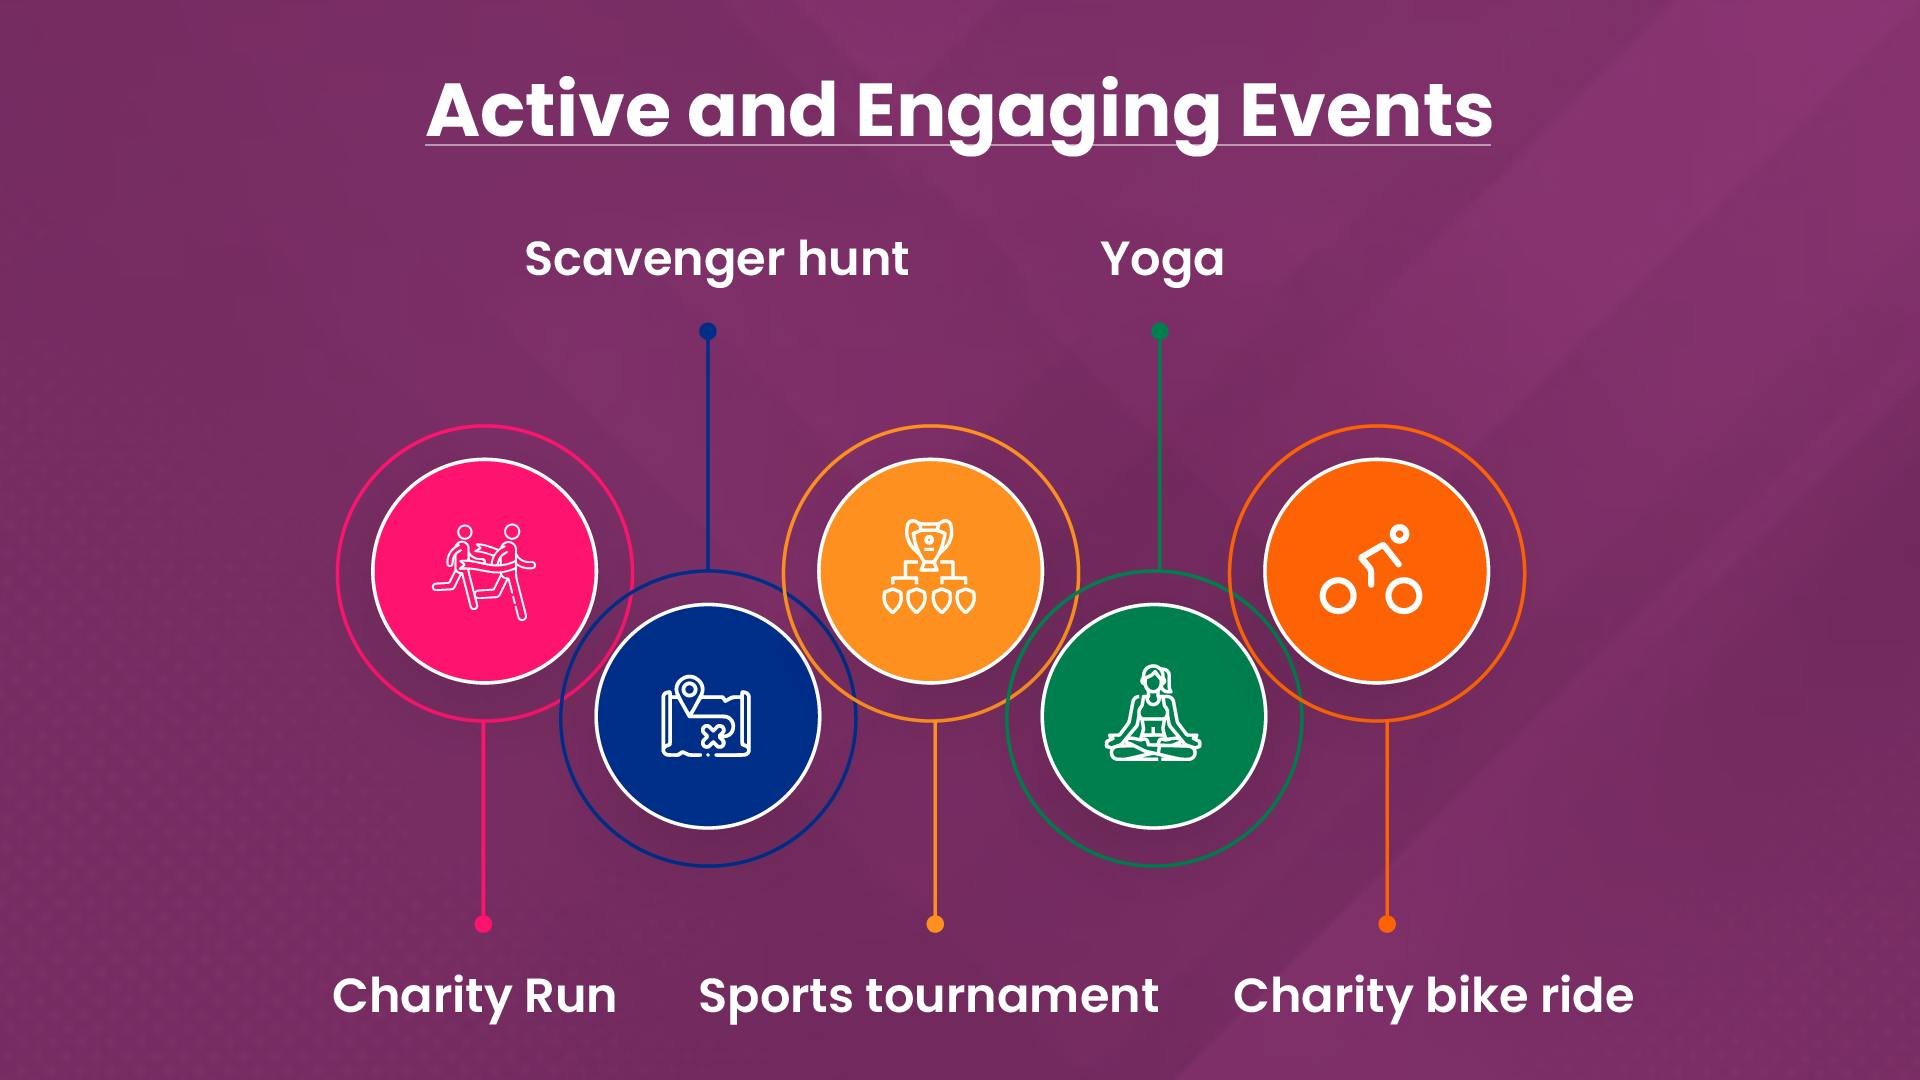 Category 2 - Active and engaging events